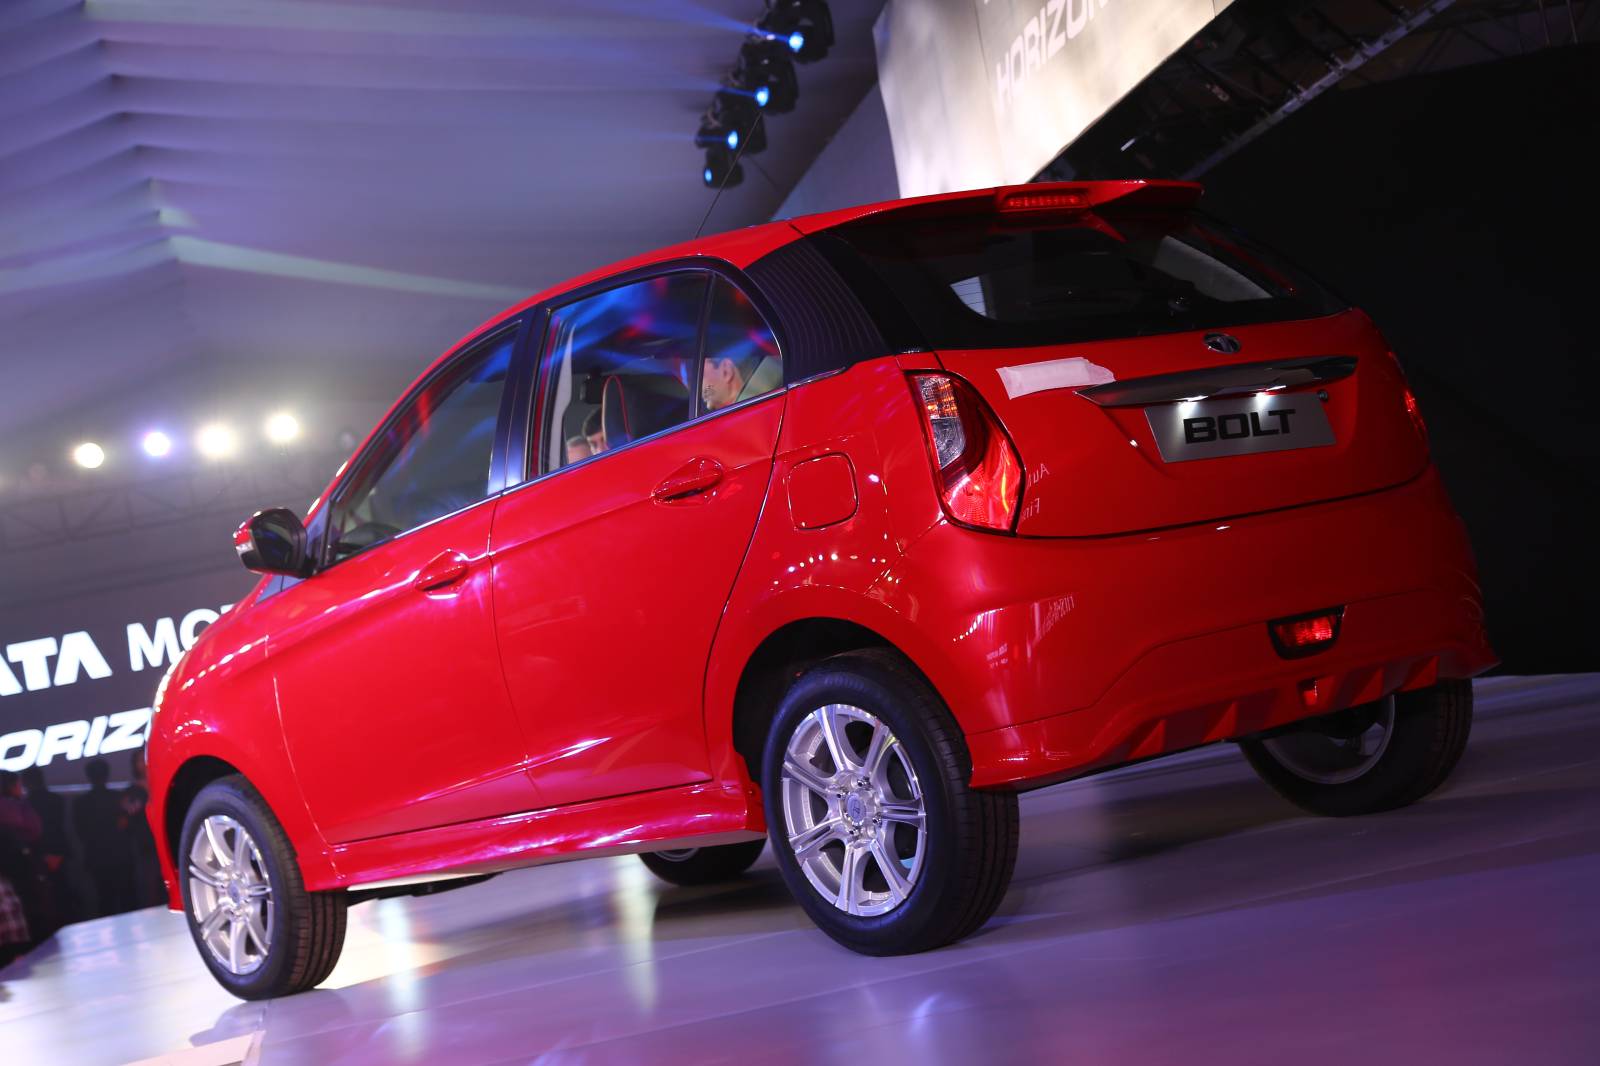 Tata Zest Sedan and Bolt Hatch Unveiled in New Delhi [Live